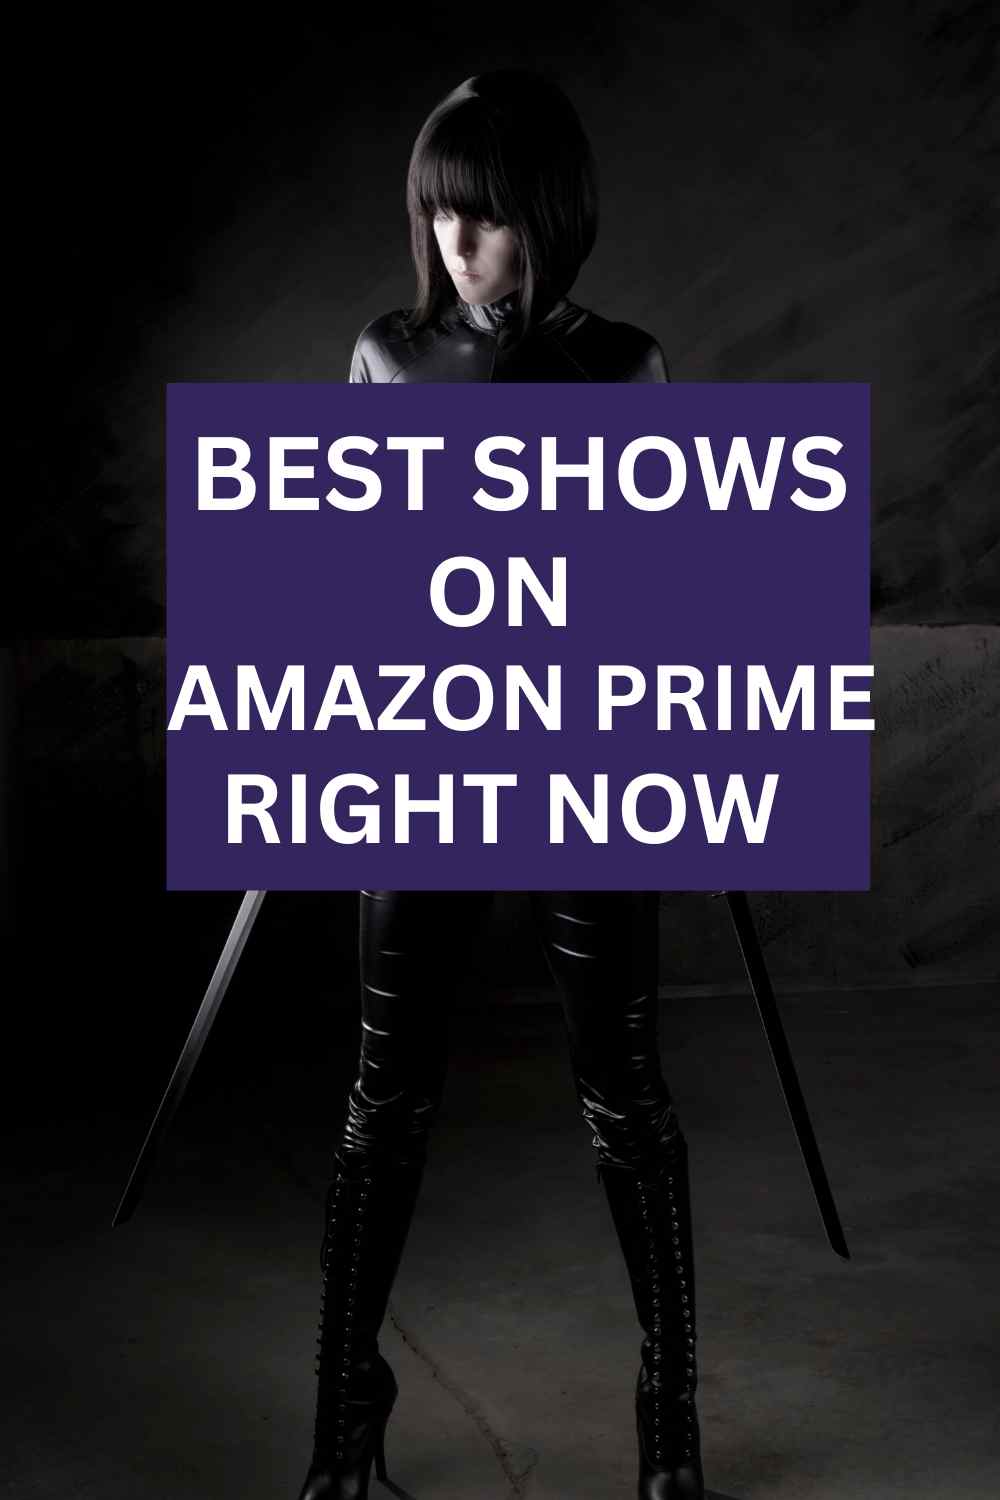 BEST SHOWS ON AMAZON PRIME RIGHT NOW